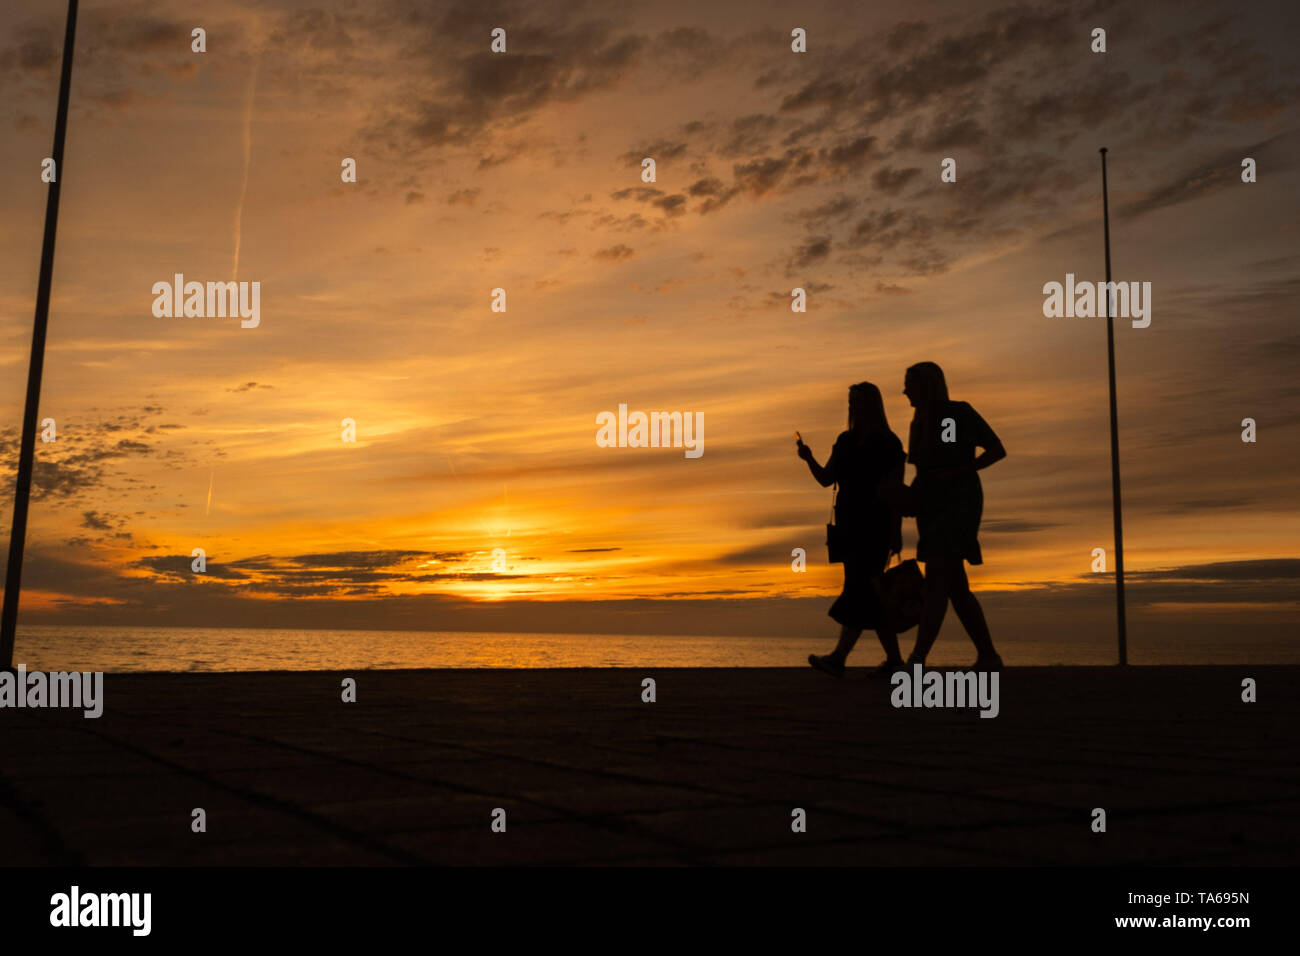 Aberystwyth Wales UK, Wednesday 22 May 2019  UK Weather: Two women  silhouetted  strolling along the seafront promenade at sunset in Aberystwyth on a mild May evening, at the end of a day of warm spring sunshine on the west coast of Wales. photo credit: Keith Morris / Alamy Live News Stock Photo